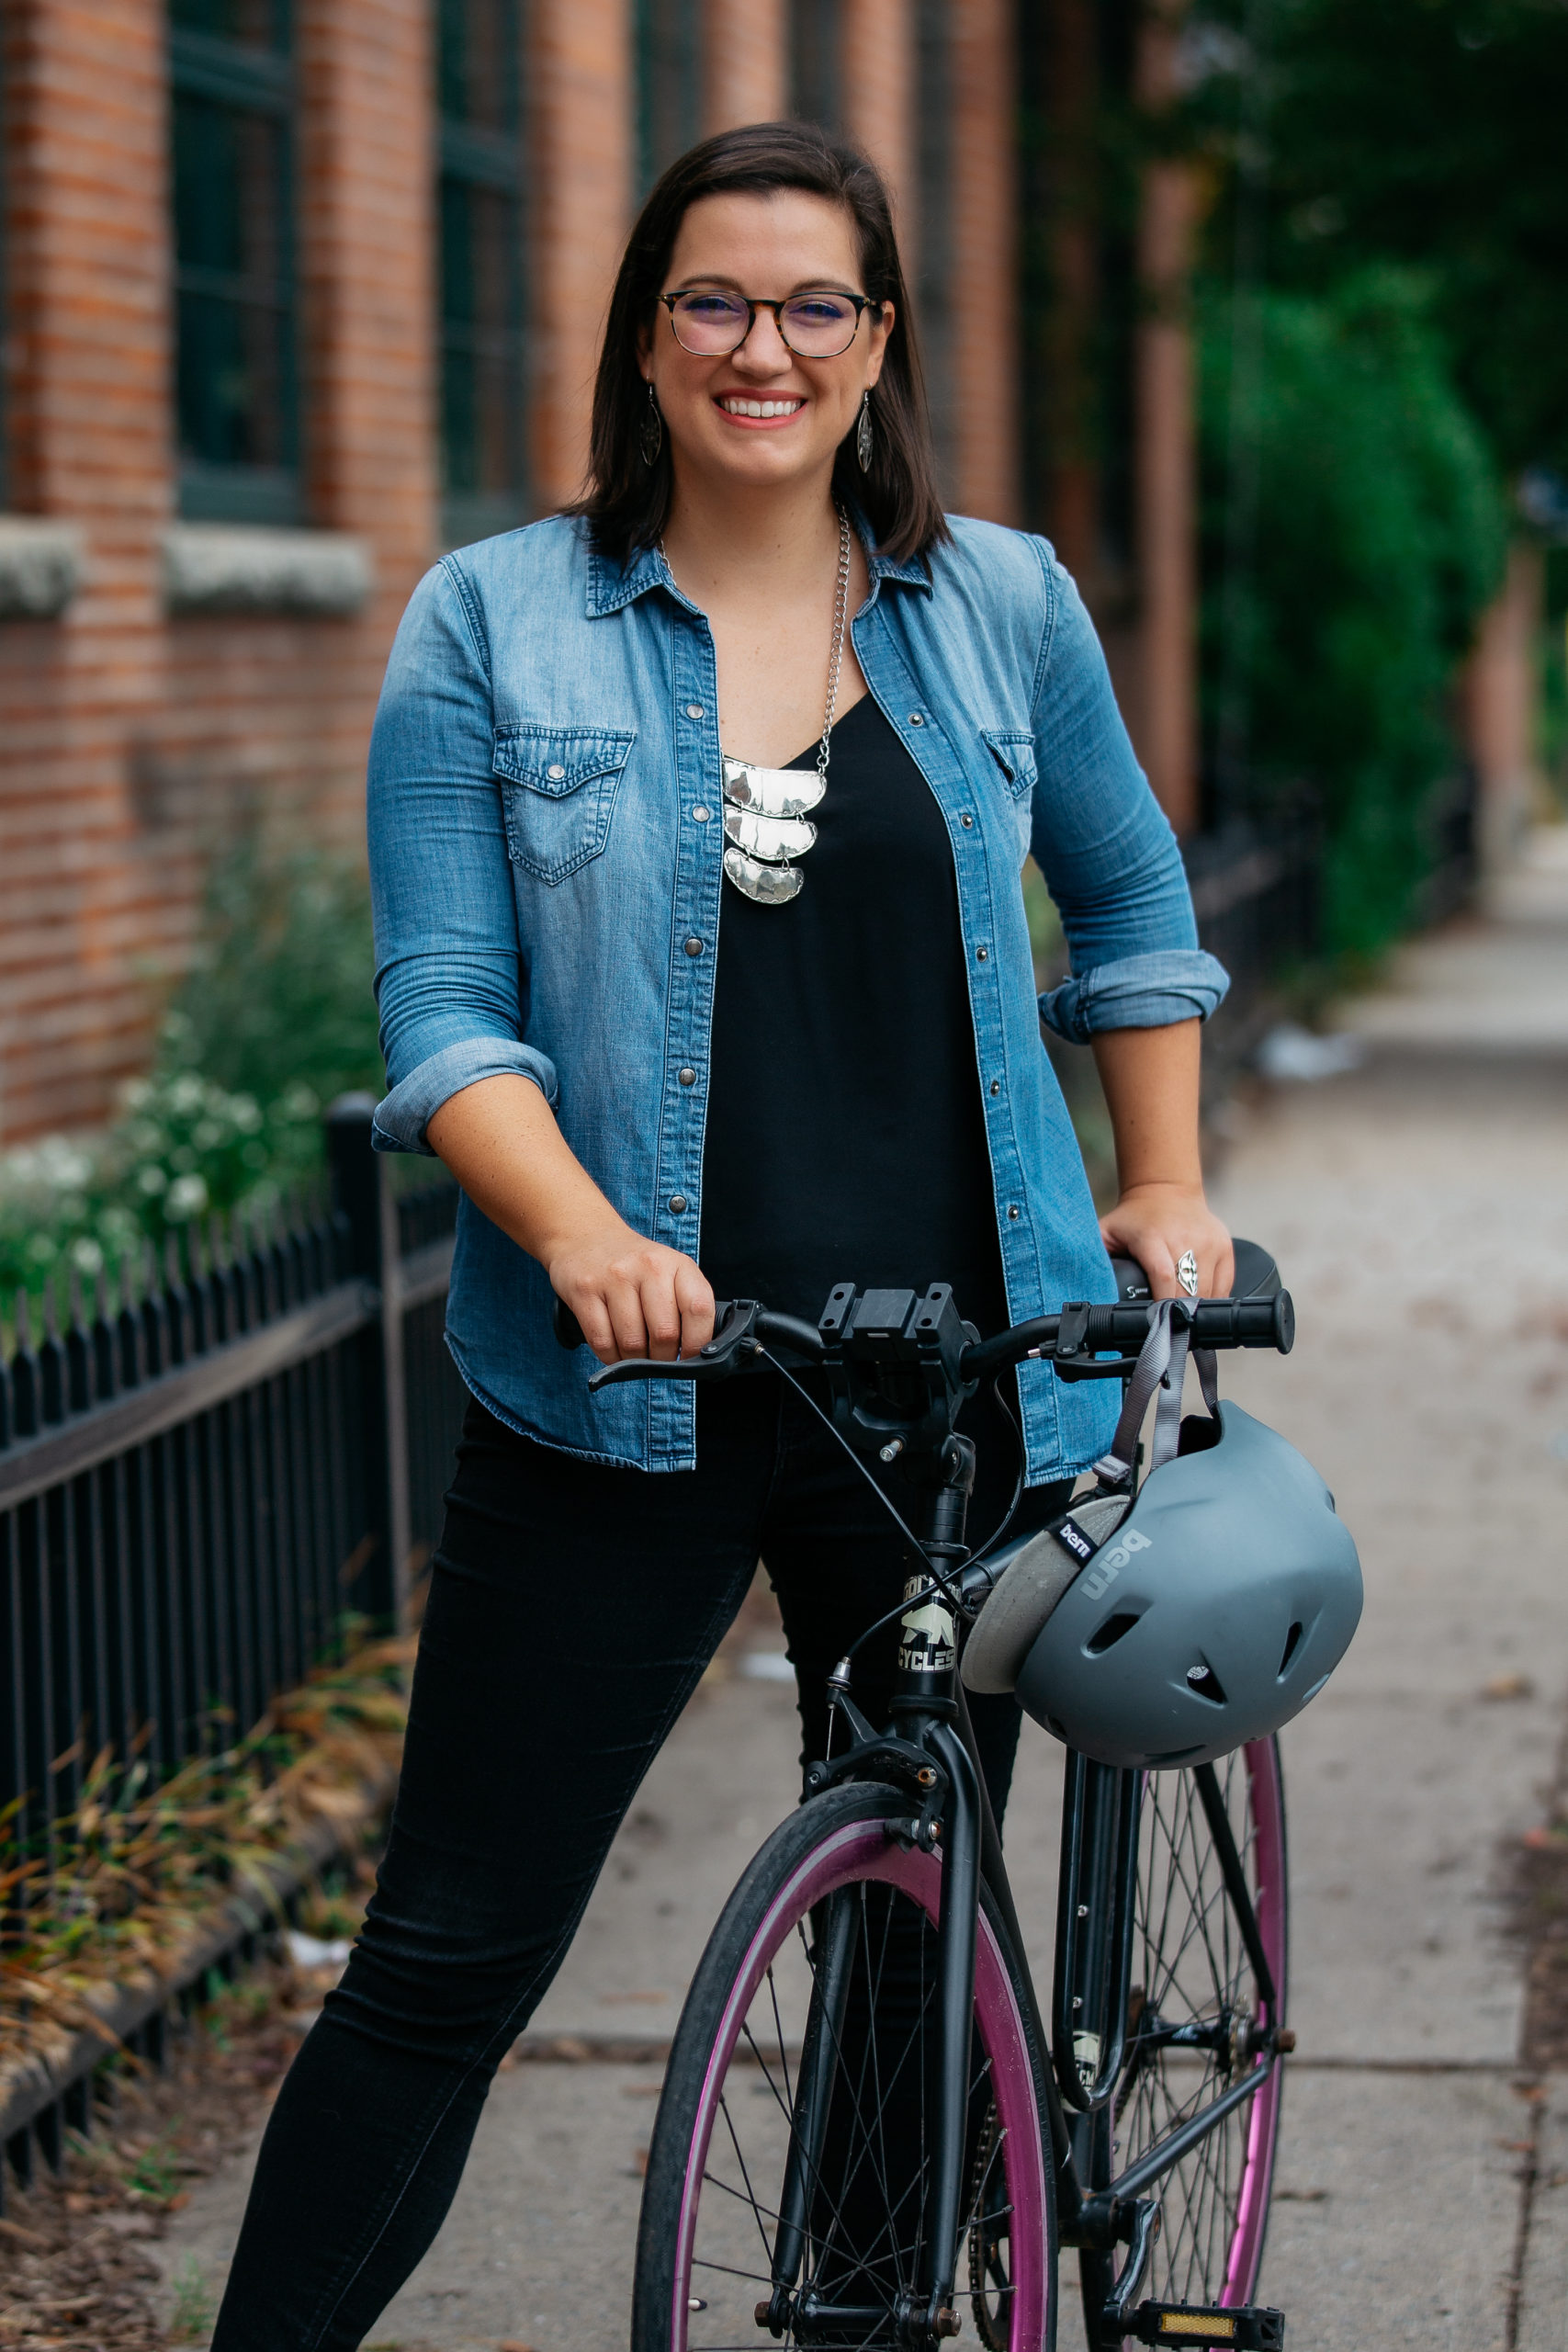 Adrienne Keene with her bicycle